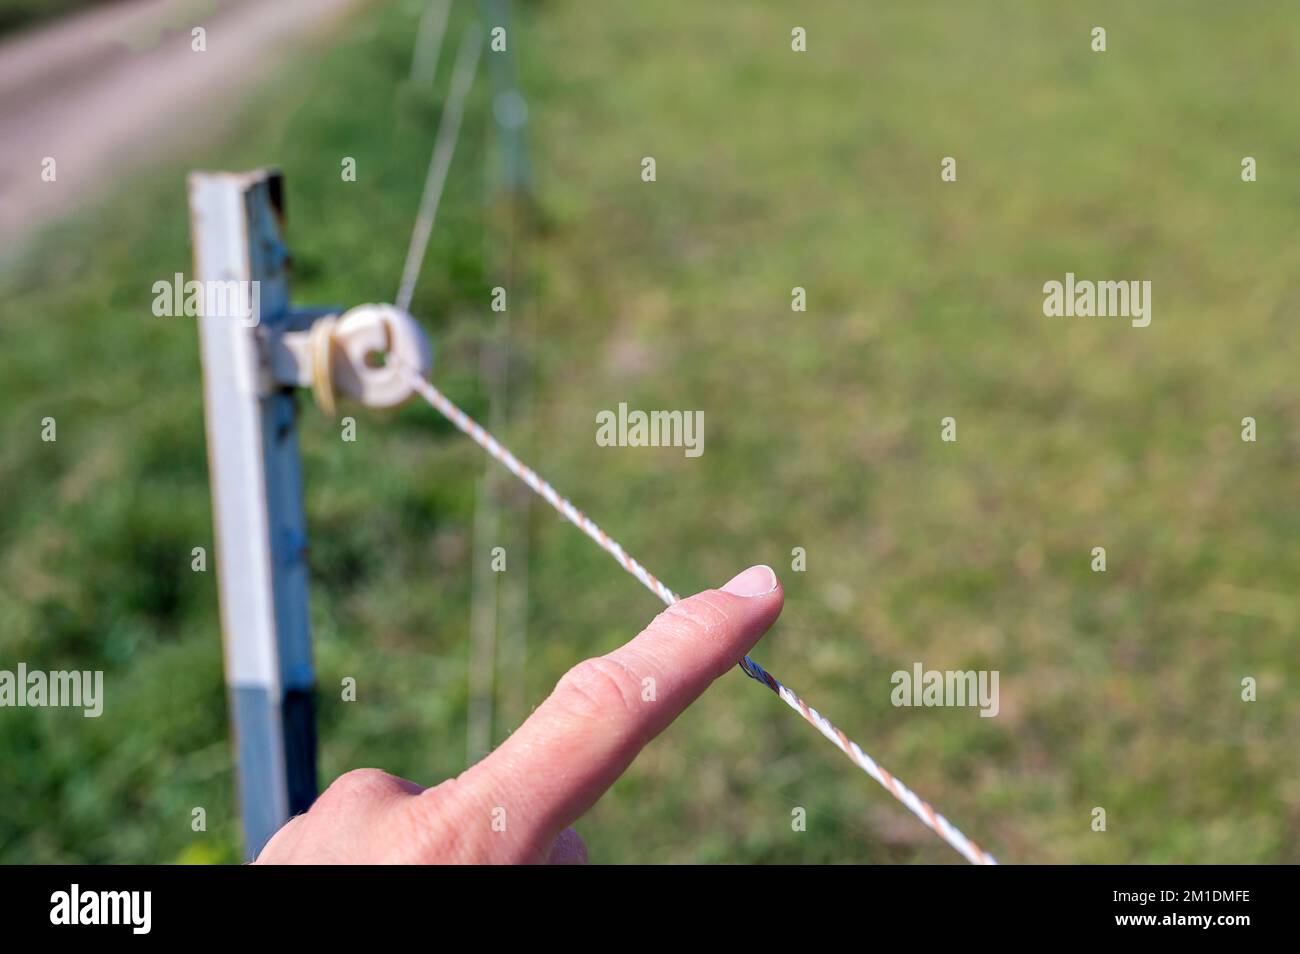 Touching an electric fence as a test or test of courage Stock Photo